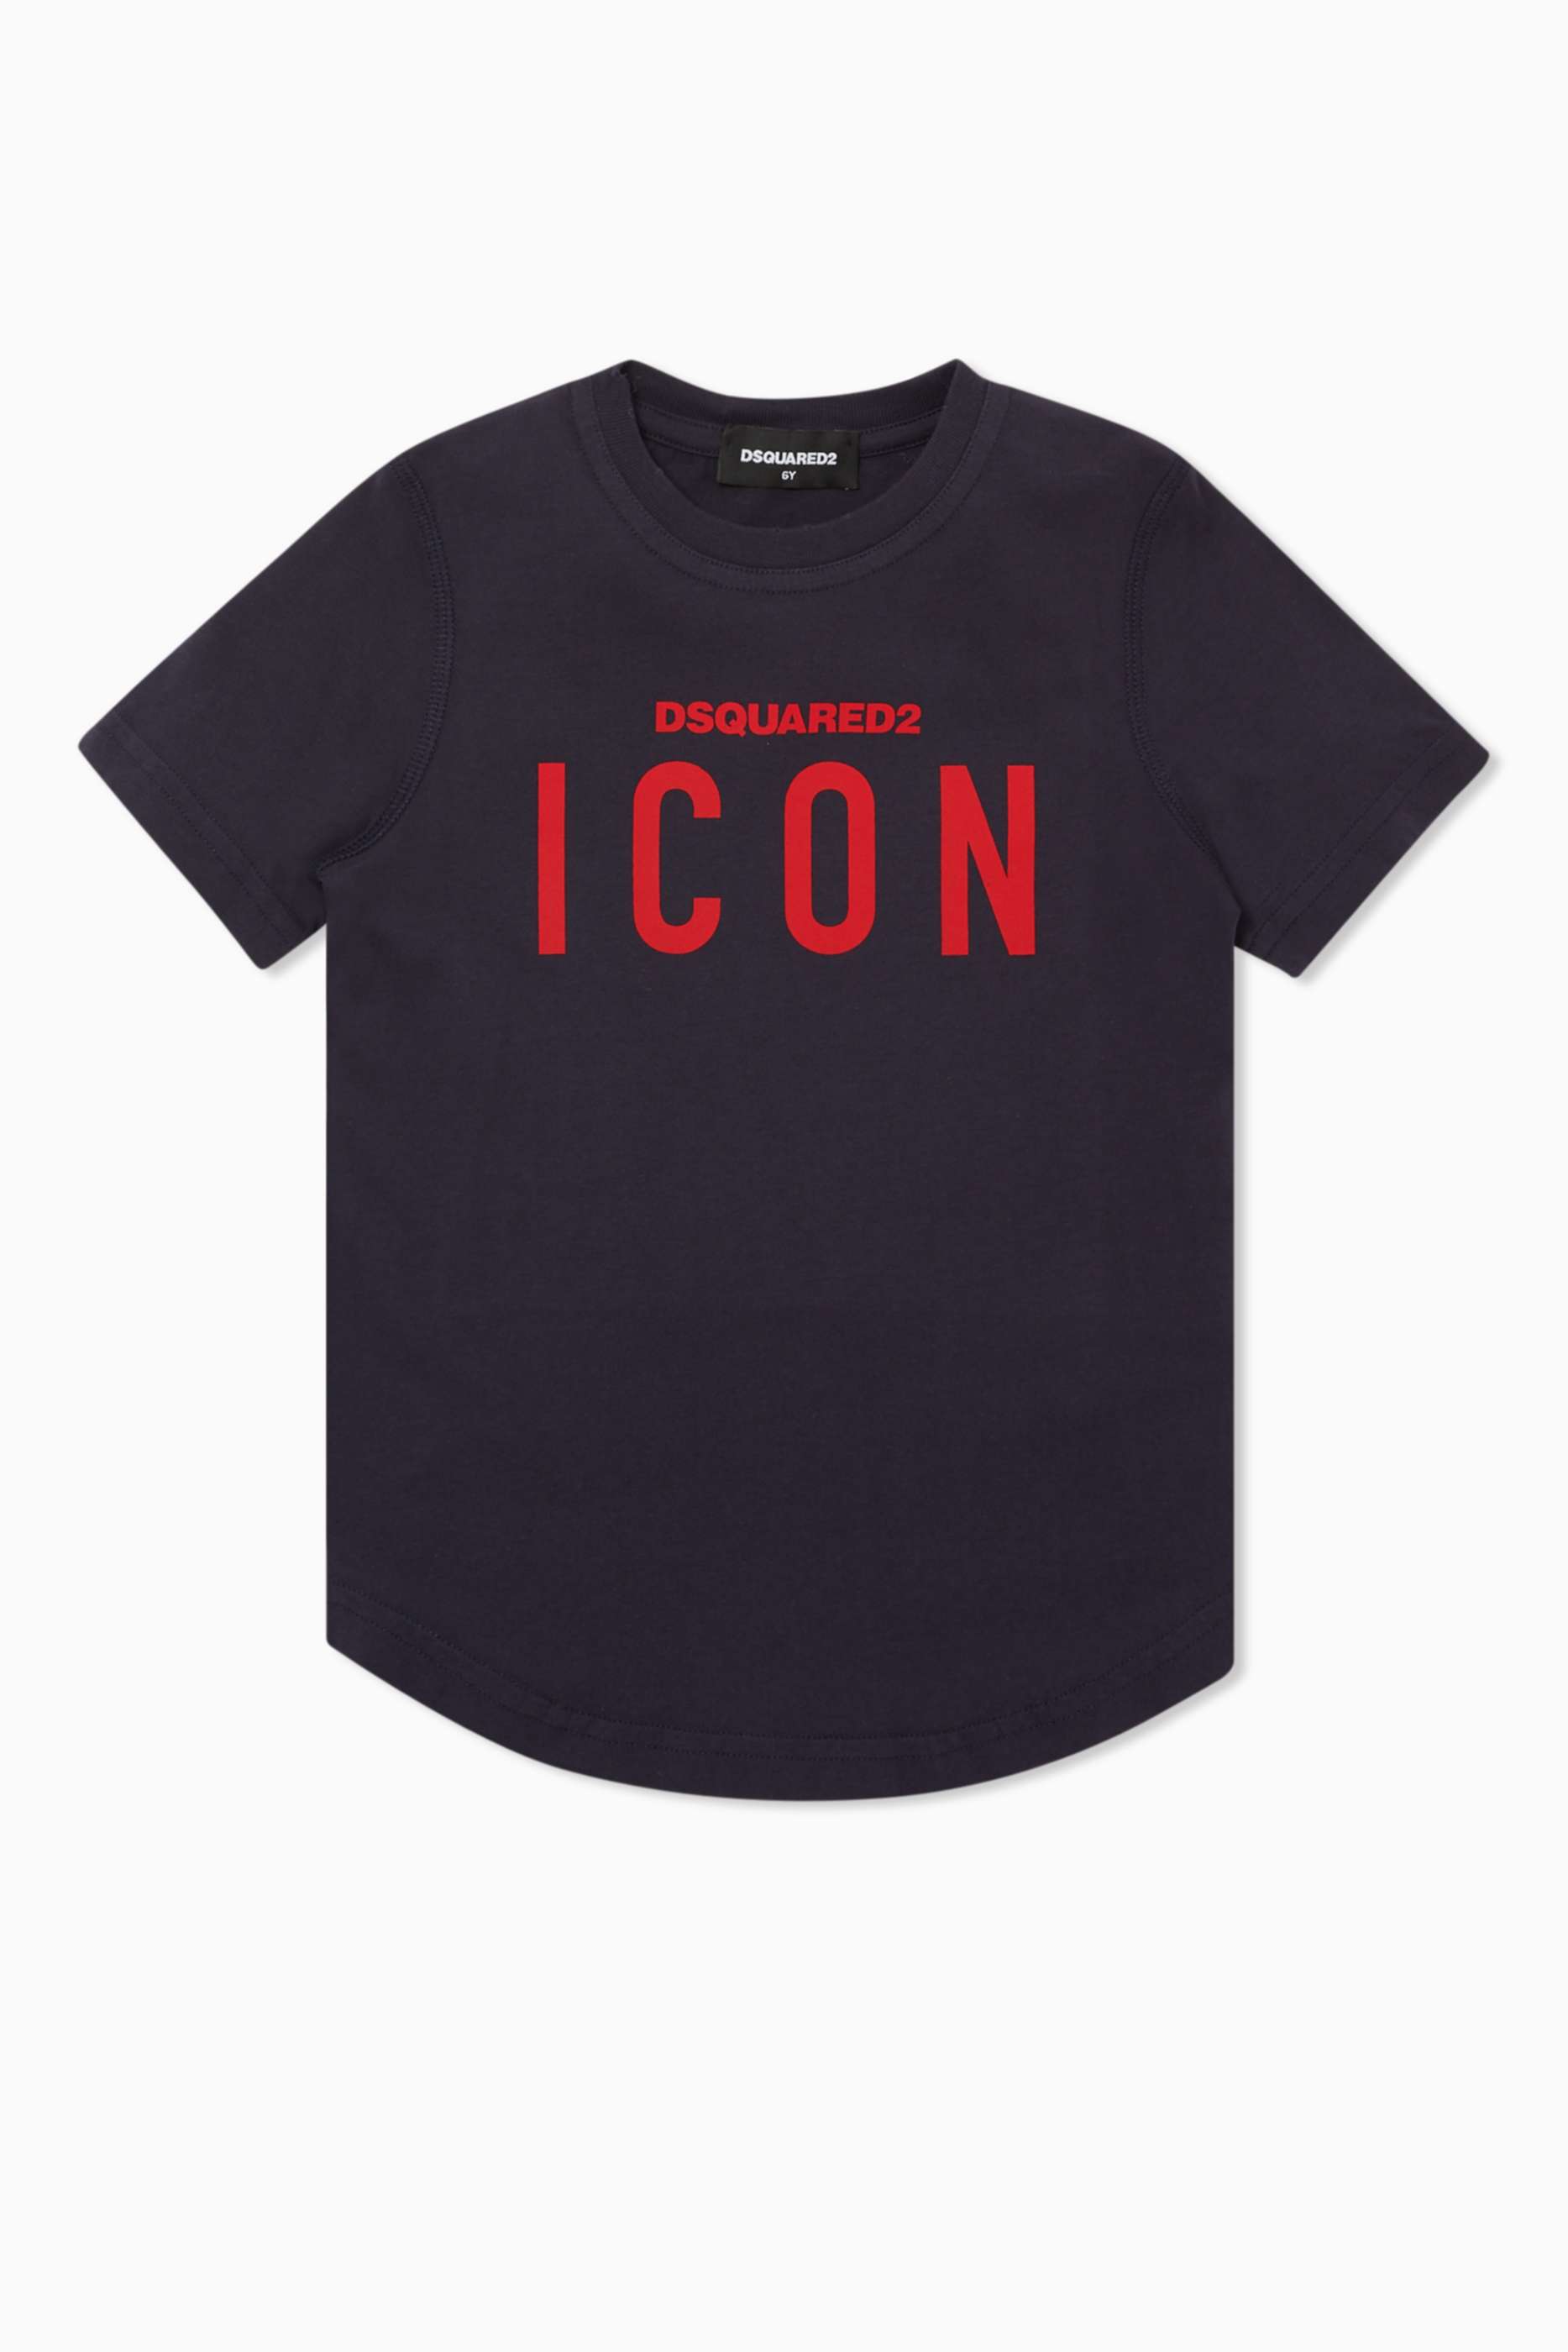 t shirt icon dsquared2